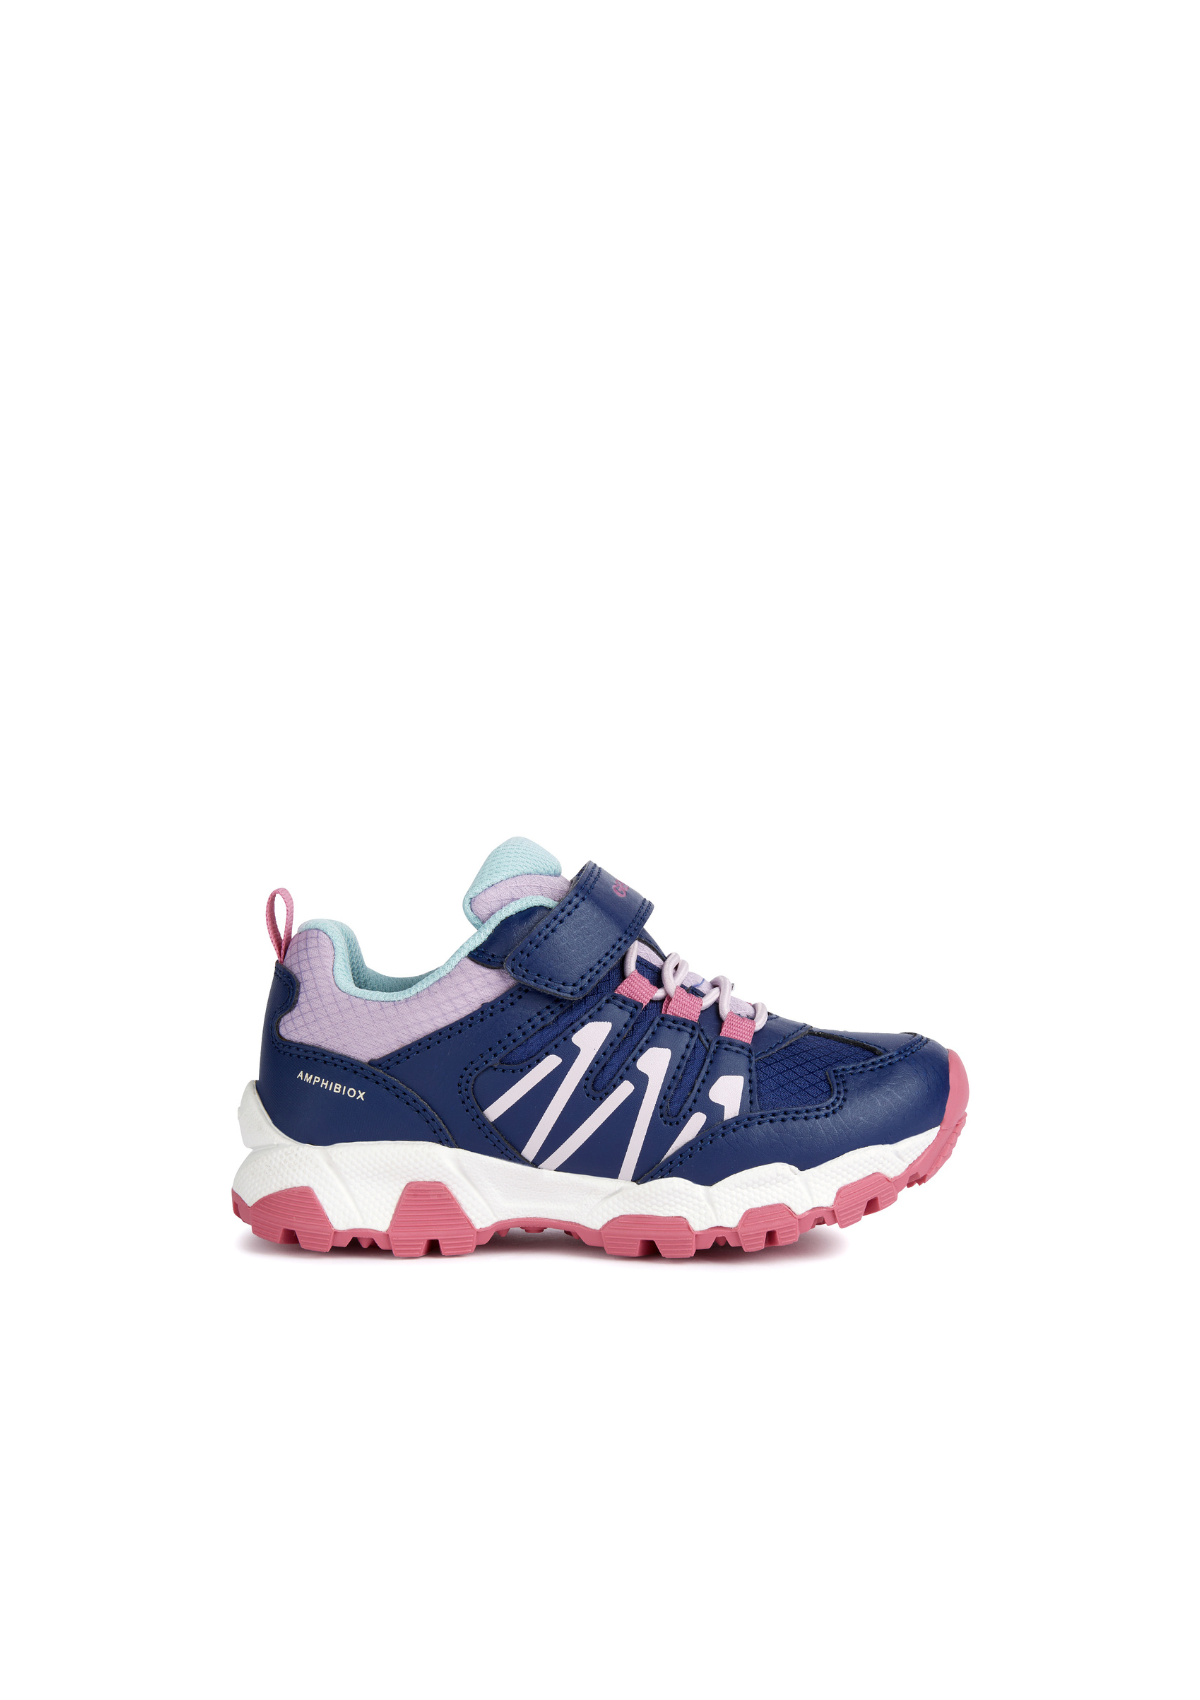 Geox Girls Trainers Magnetar Abx Navy Lilac